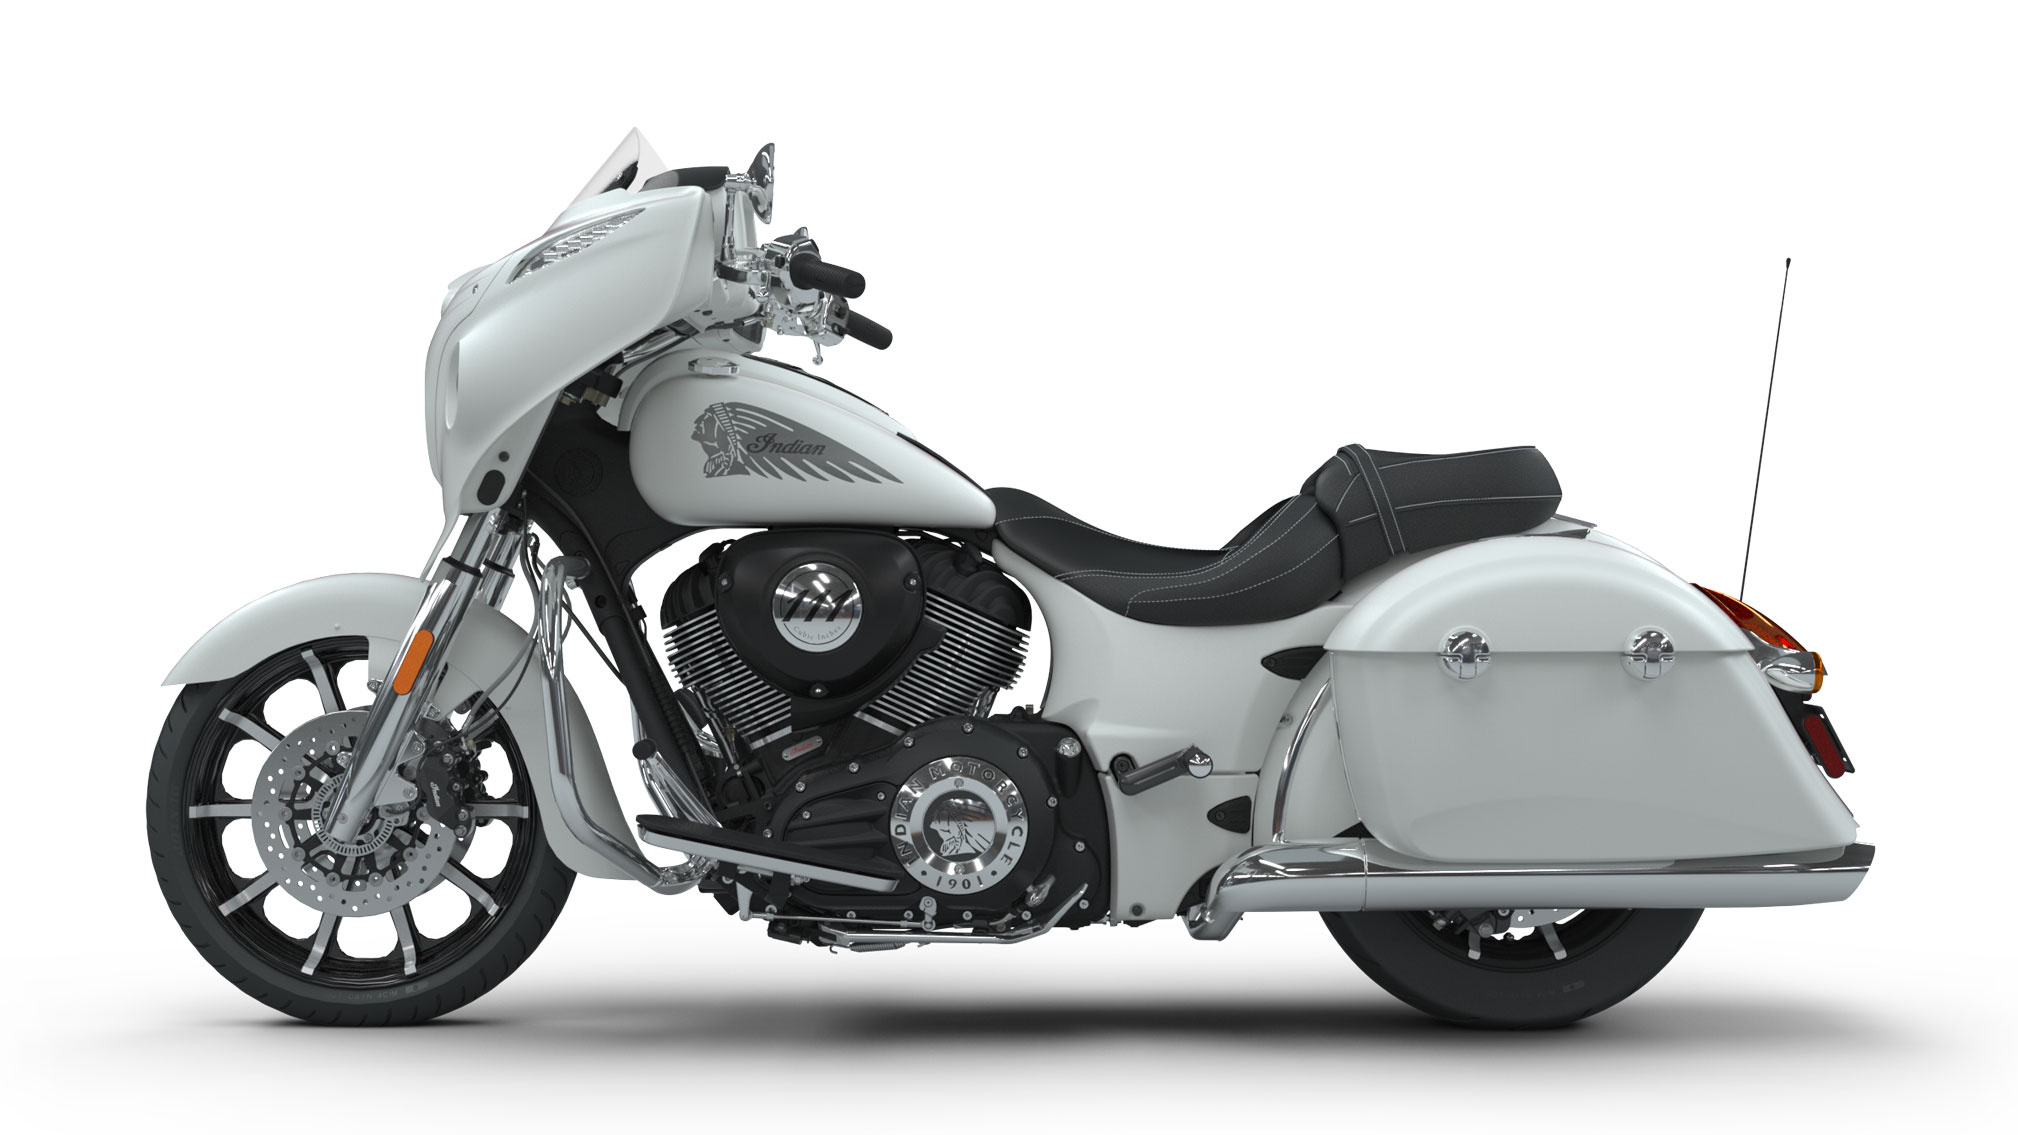 Indian Chieftain Limited, 2018 model, Luxury and power, Total Motorcycle review, 2020x1140 HD Desktop